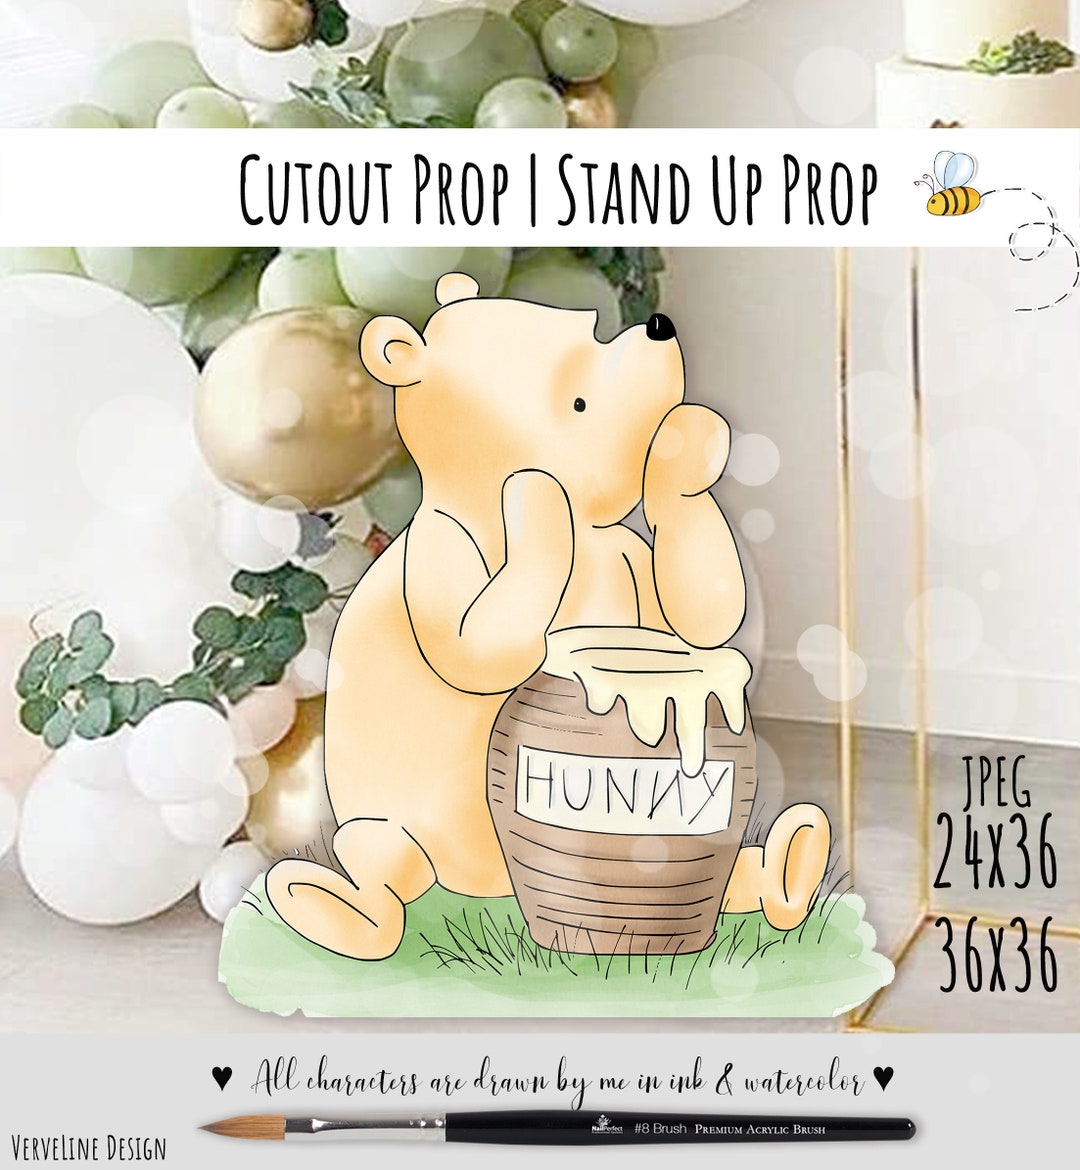 Cutout Decor Winnie the Pooh, Classic Winnie the Pooh Baby Shower, Birthday  Party, Cutout Prop /stand up Prop DIGITAL DOWNLOAD 0001 